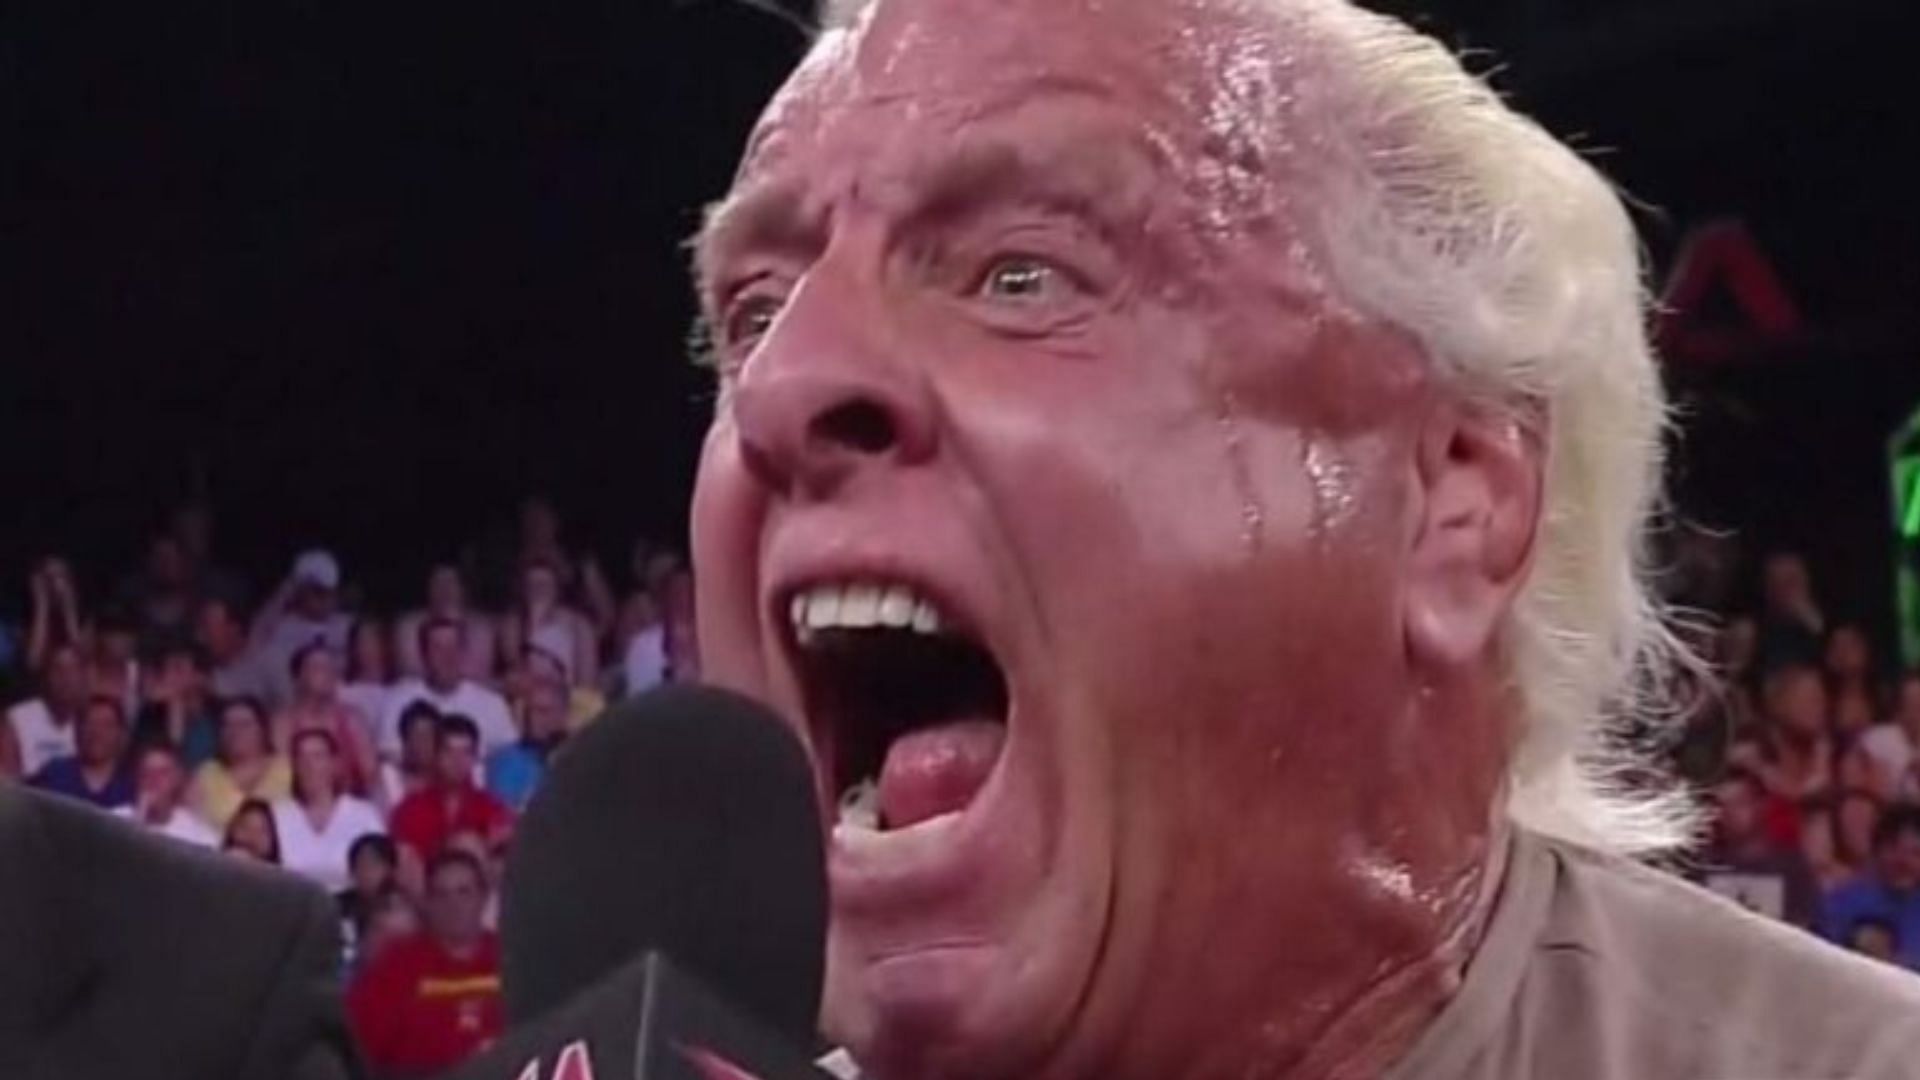 Ric Flair at a TNA Wrestling event in 2010